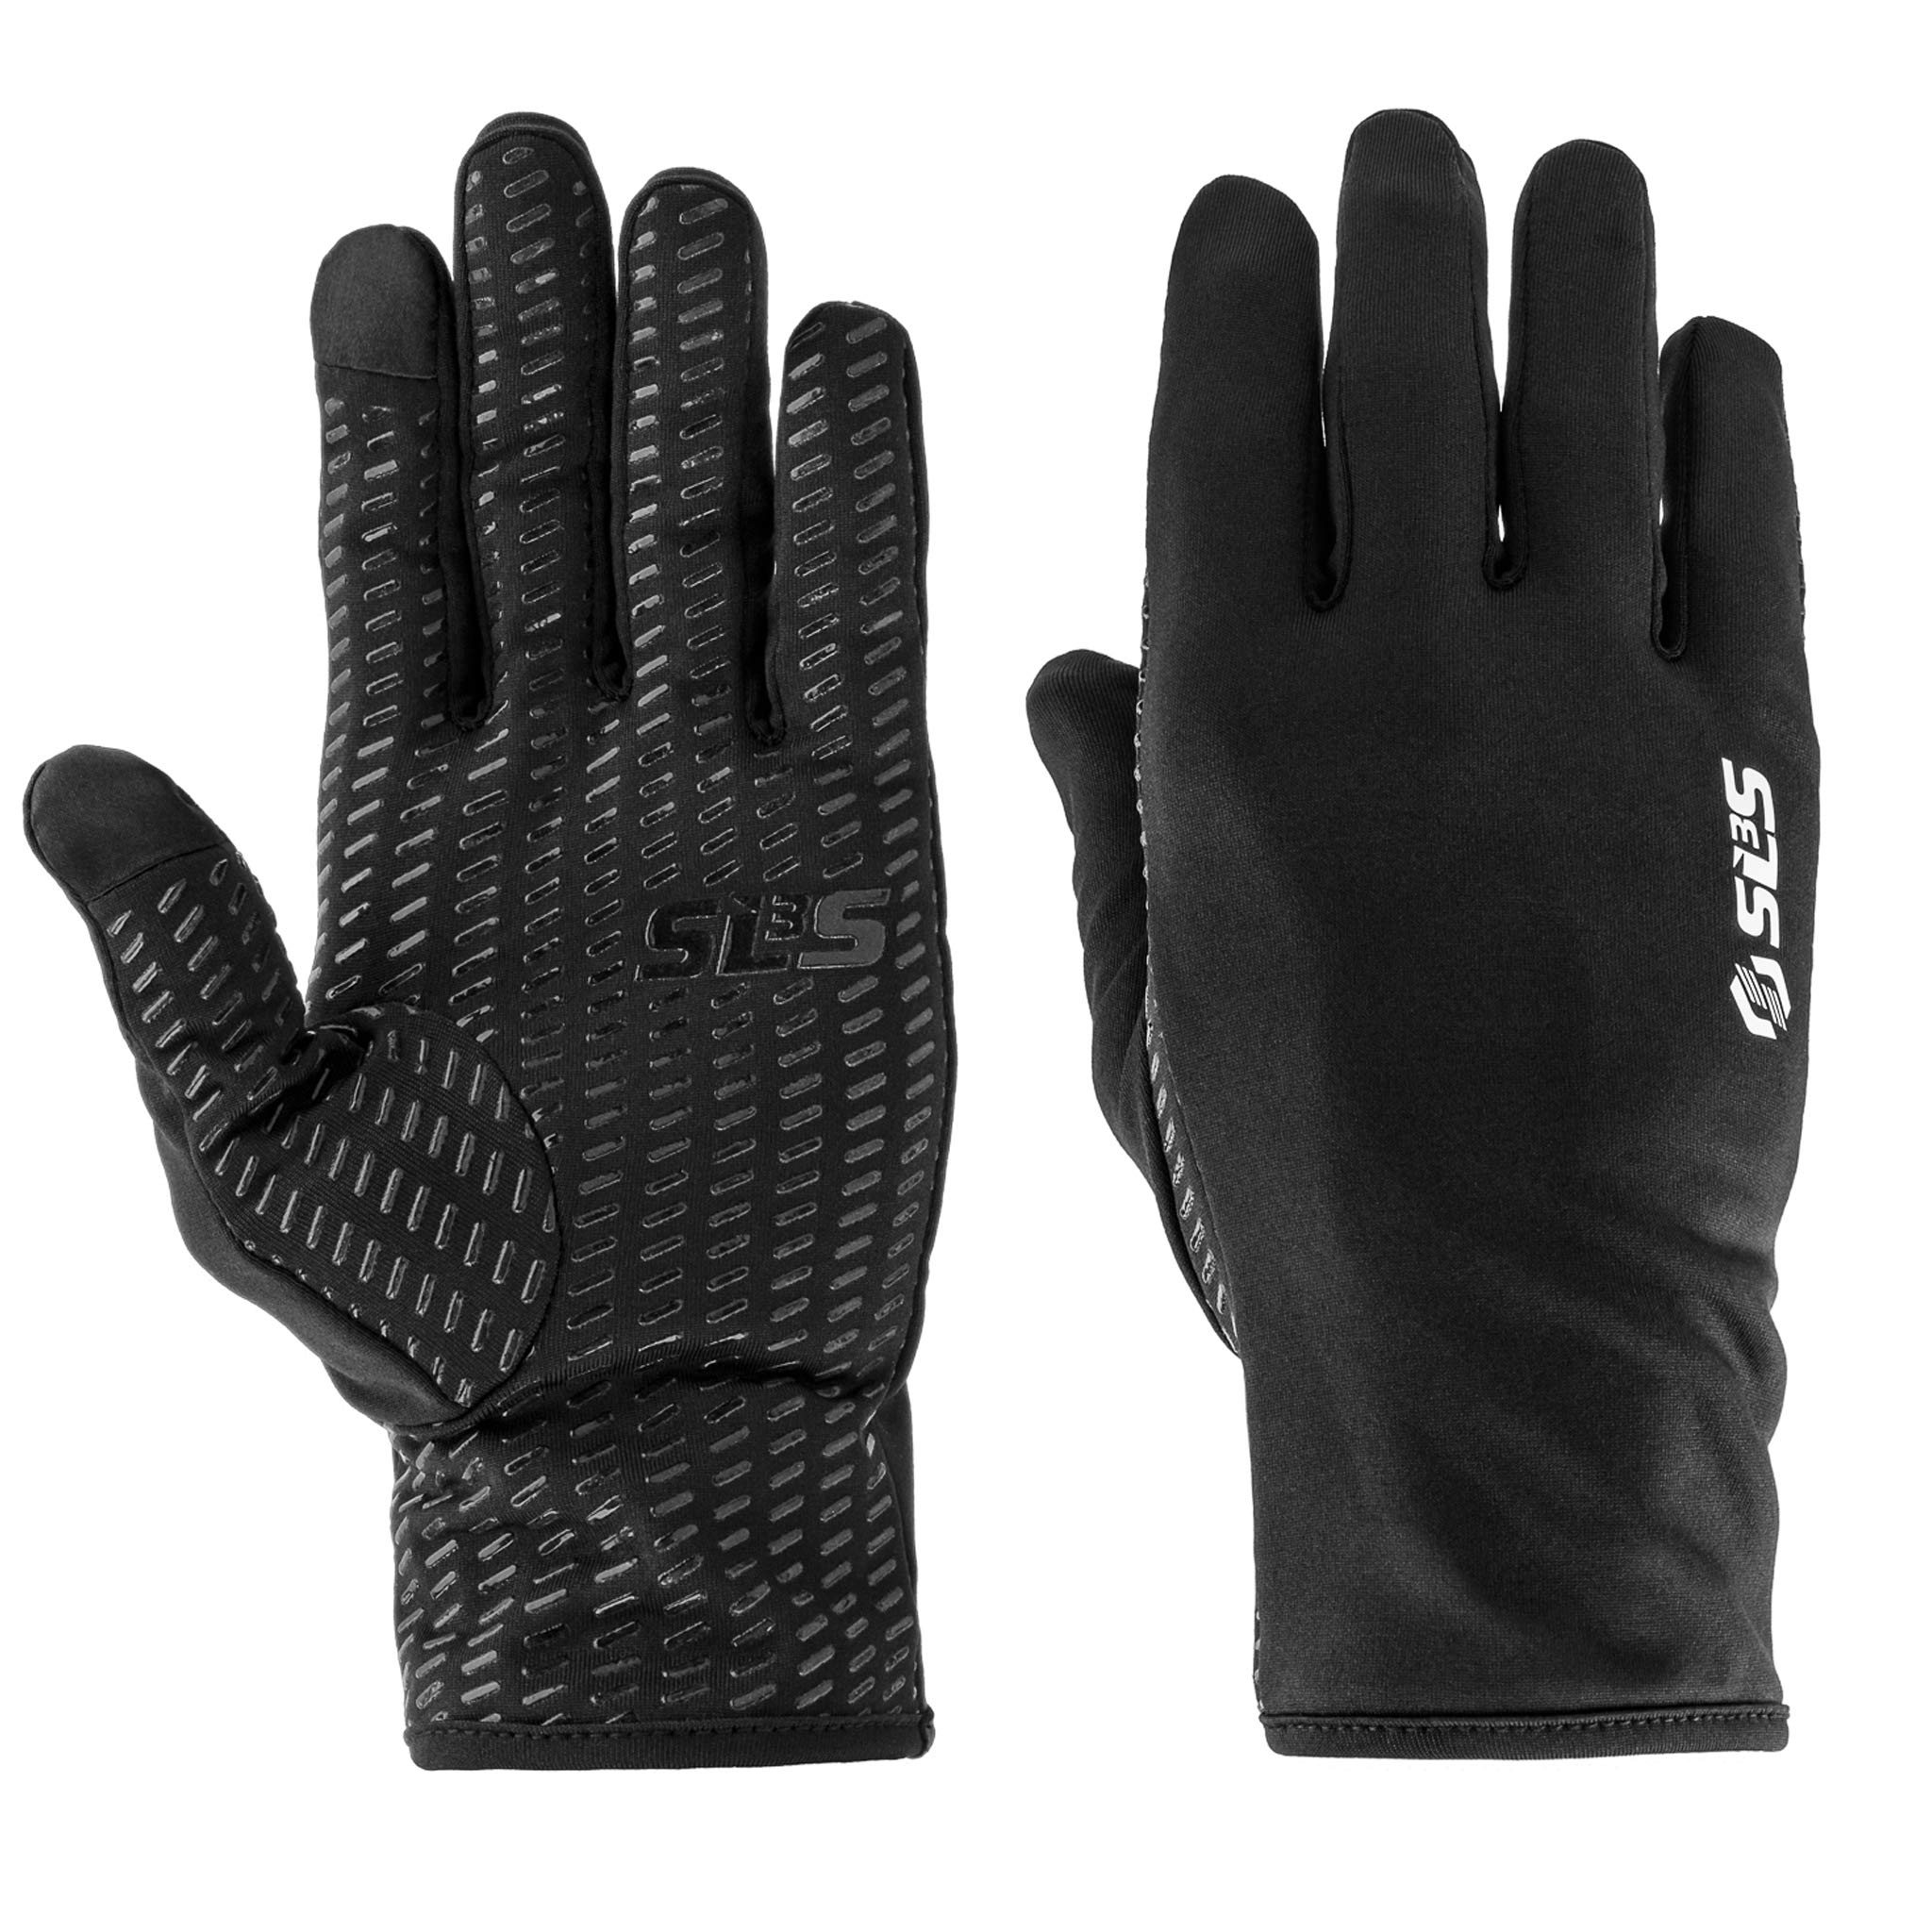 SLS3 Running gloves  Men Women  Touchscreen  Thin Winter Sports Lightweight cycling glove  Designed by Athletes for Athletes (Bl